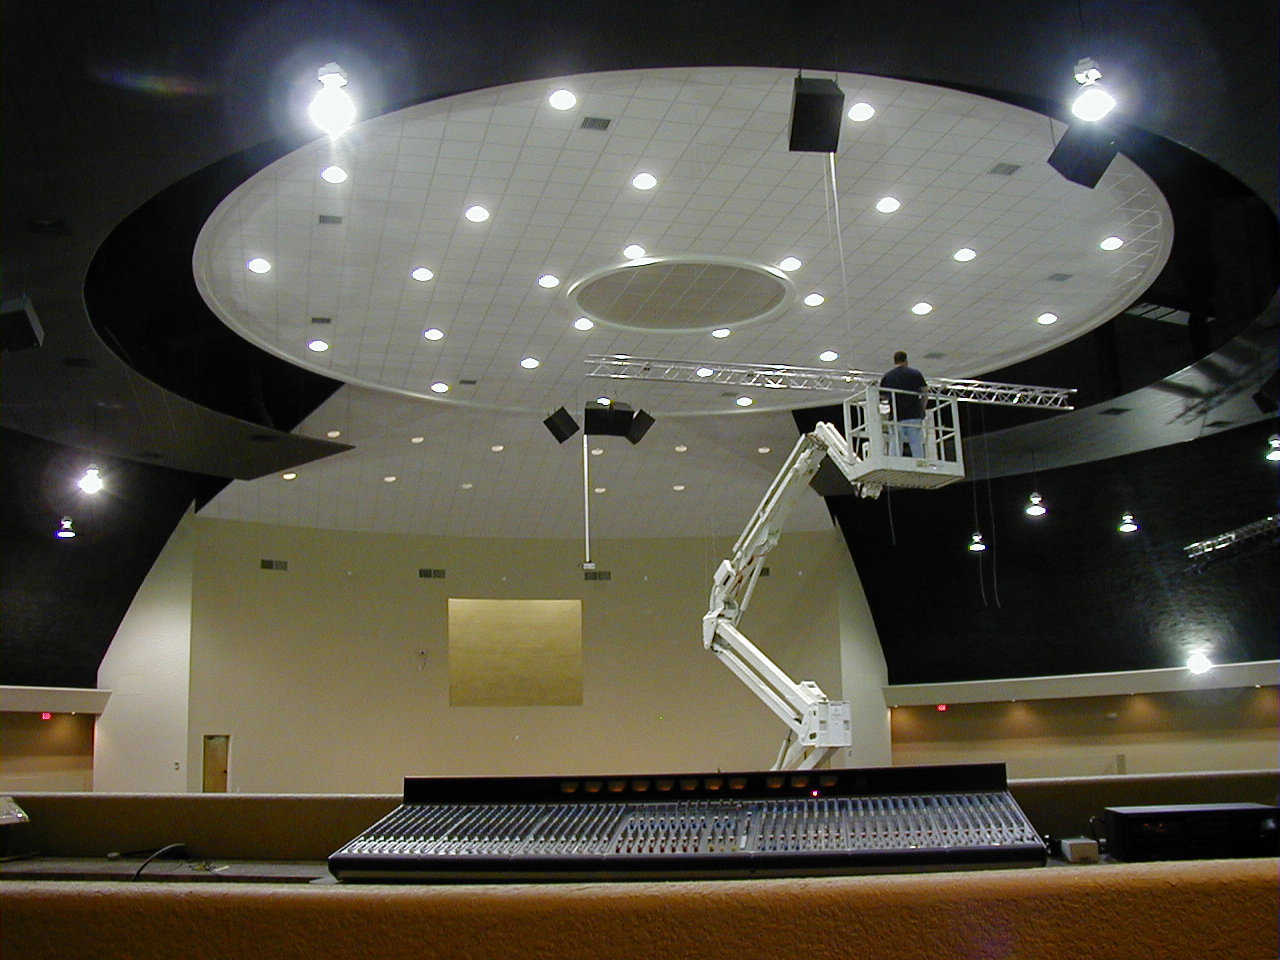 Sound and sight — Porter Falcon of Falcon Audio installed the audio/video equipment.